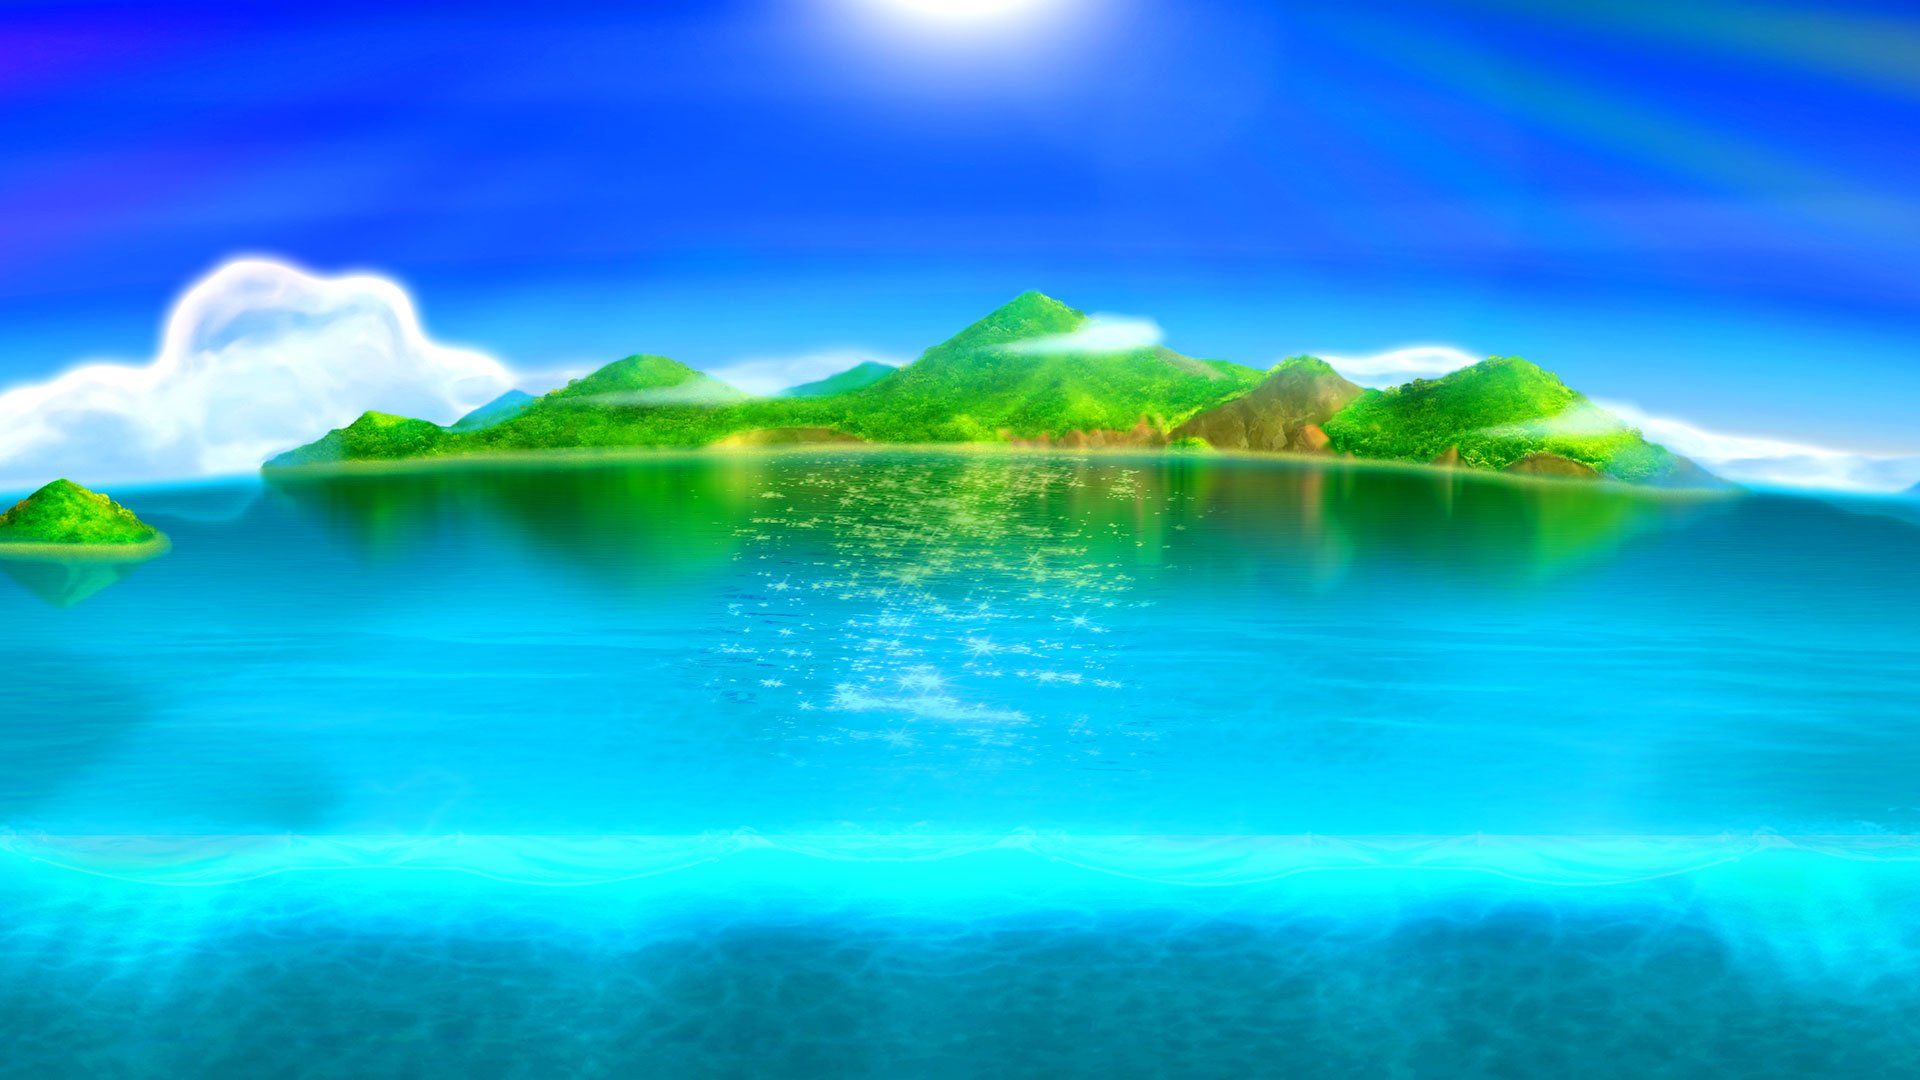 Game hight resolution background Dolphin's Island